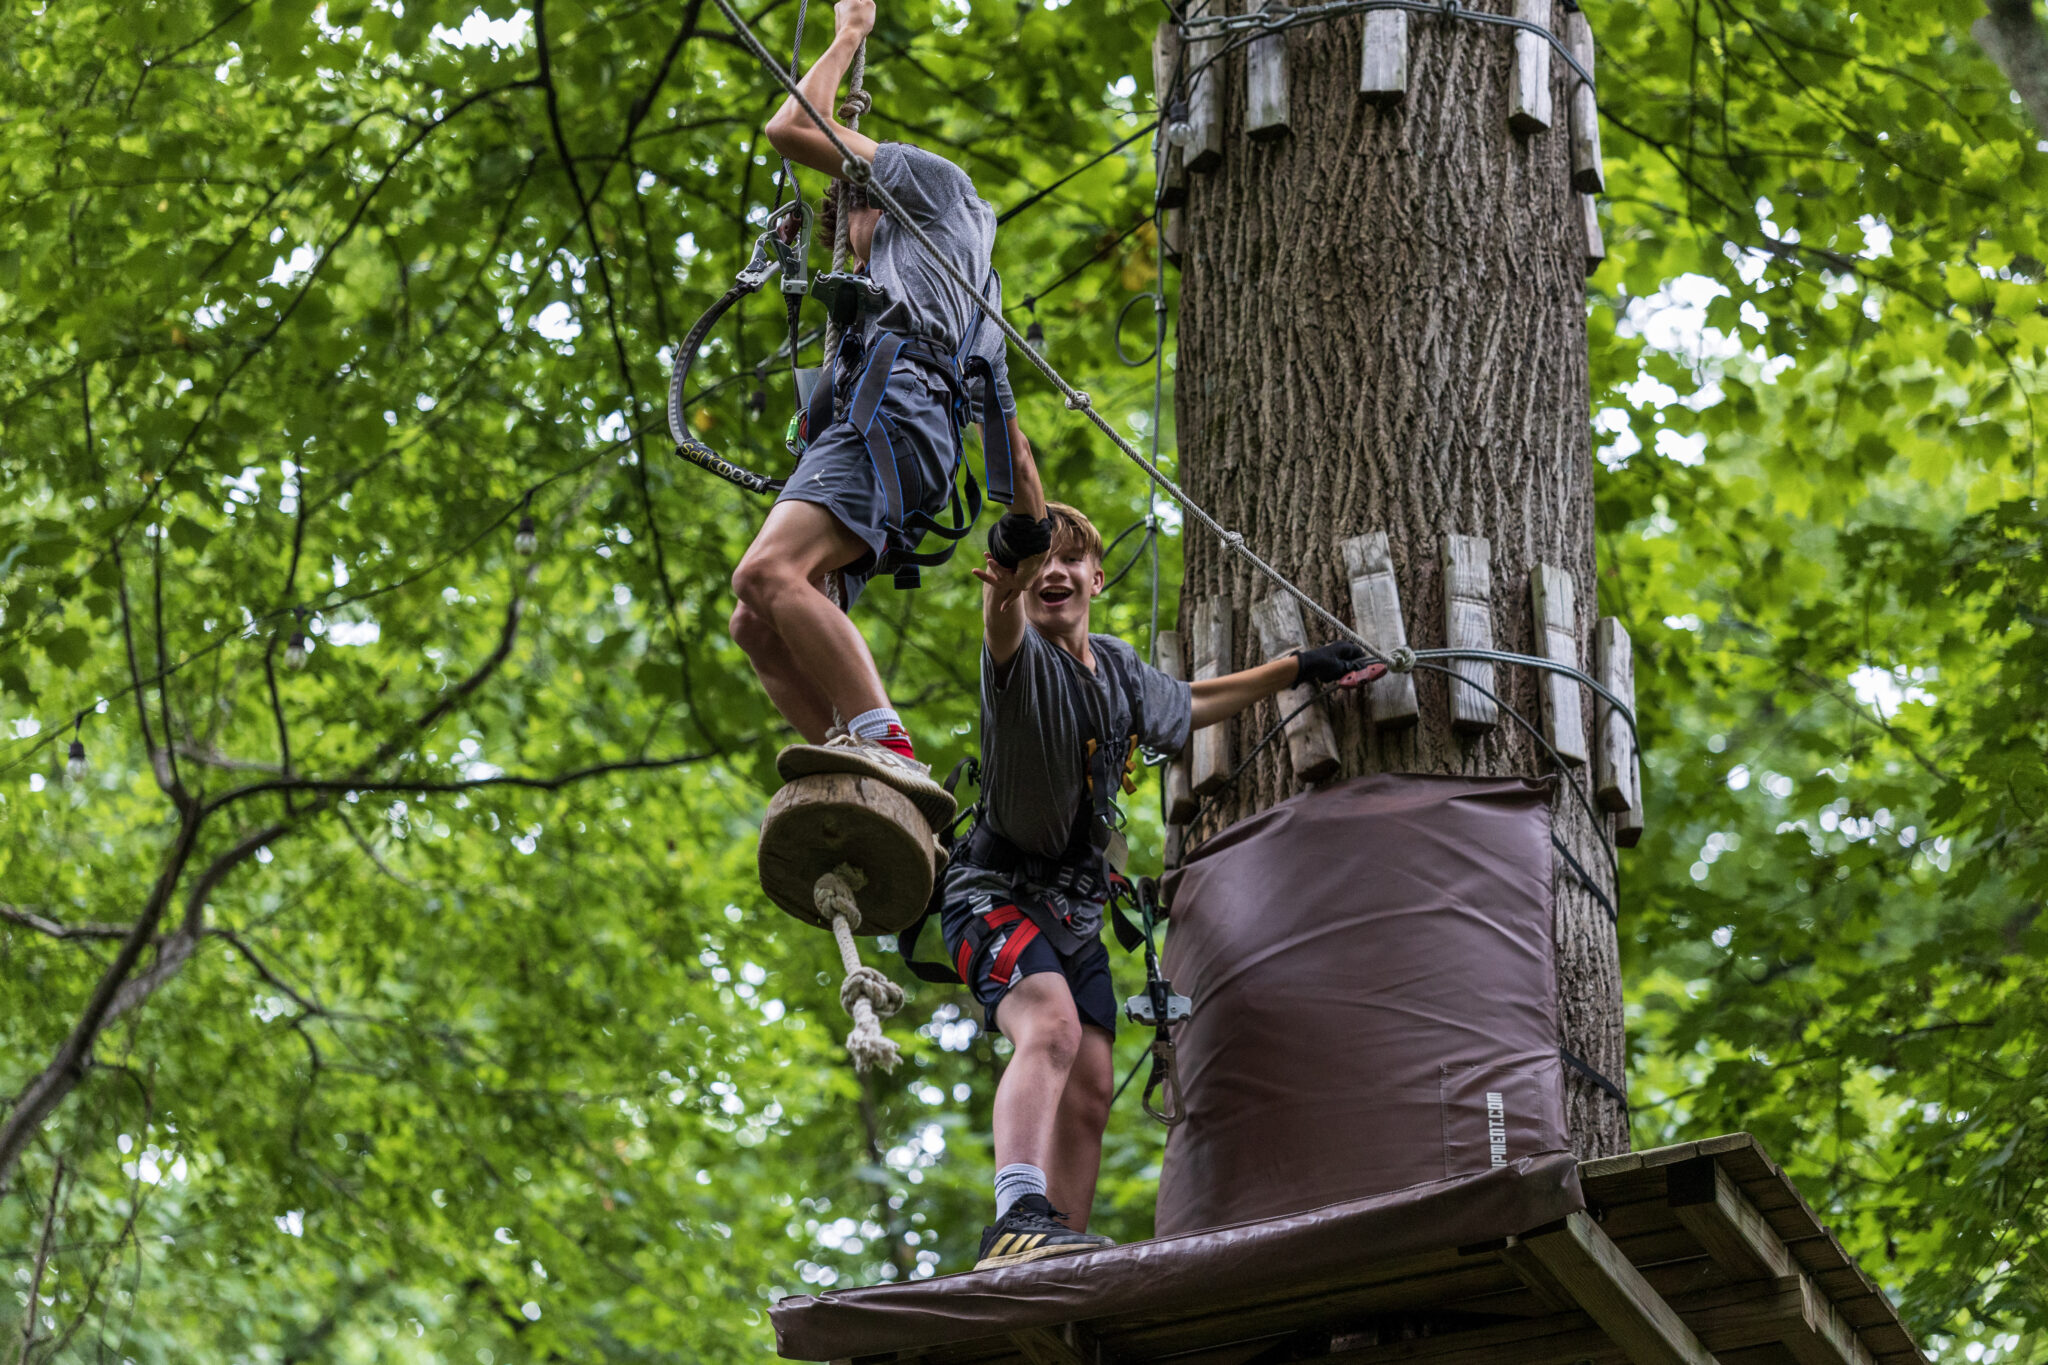 Two boys participating in the P.L.E.D.G.E. Leadership Program on a ropes course in the woods.